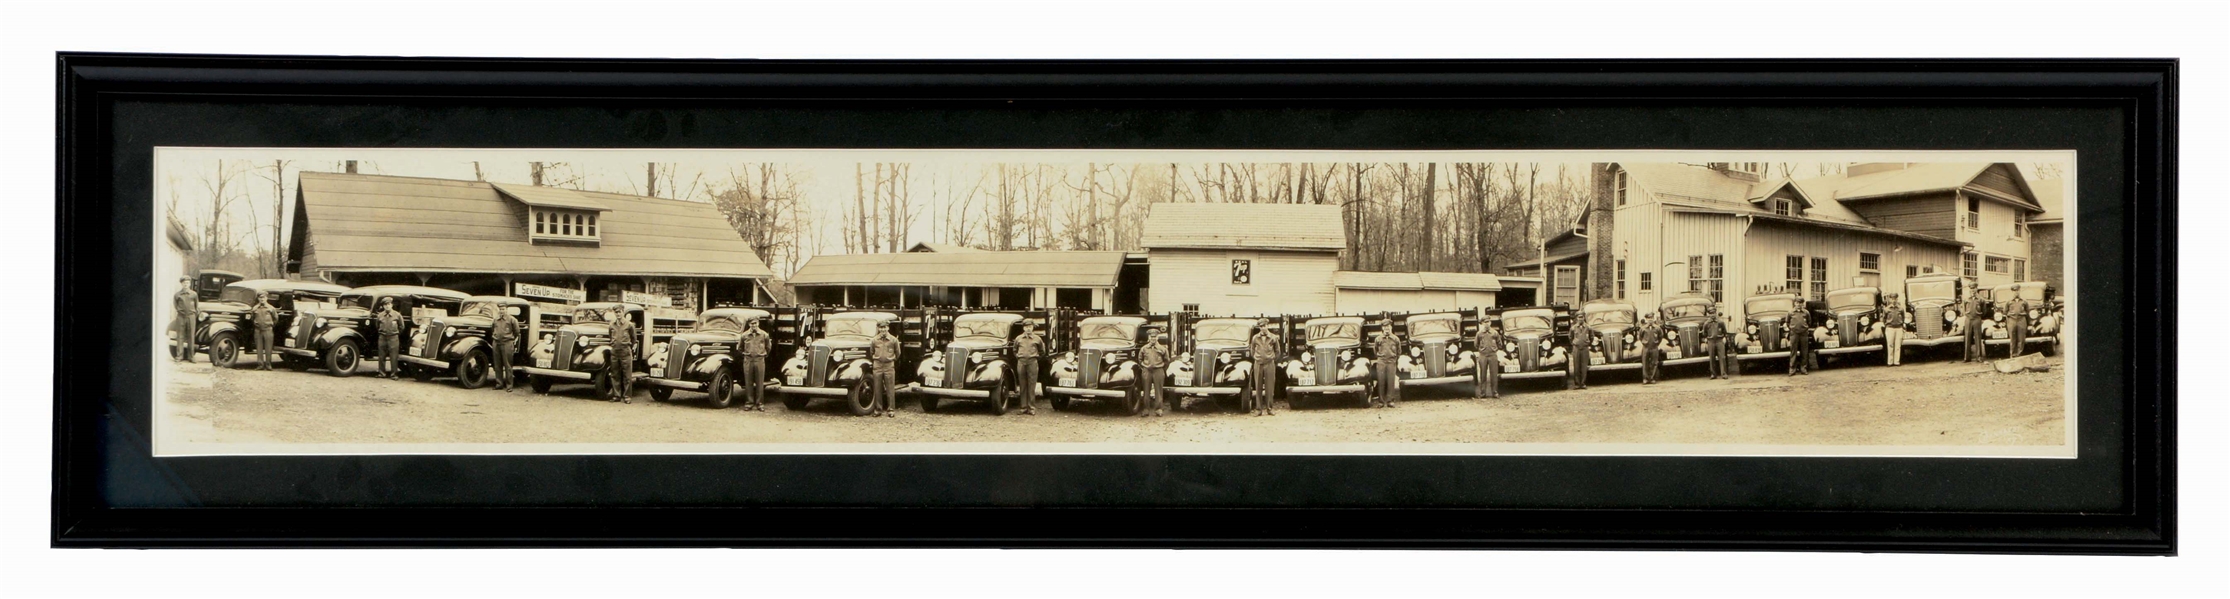 SEVEN UP DELIVERY SERVICE DRIVERS YARD LOG FRAMED PHOTOGRAPH.